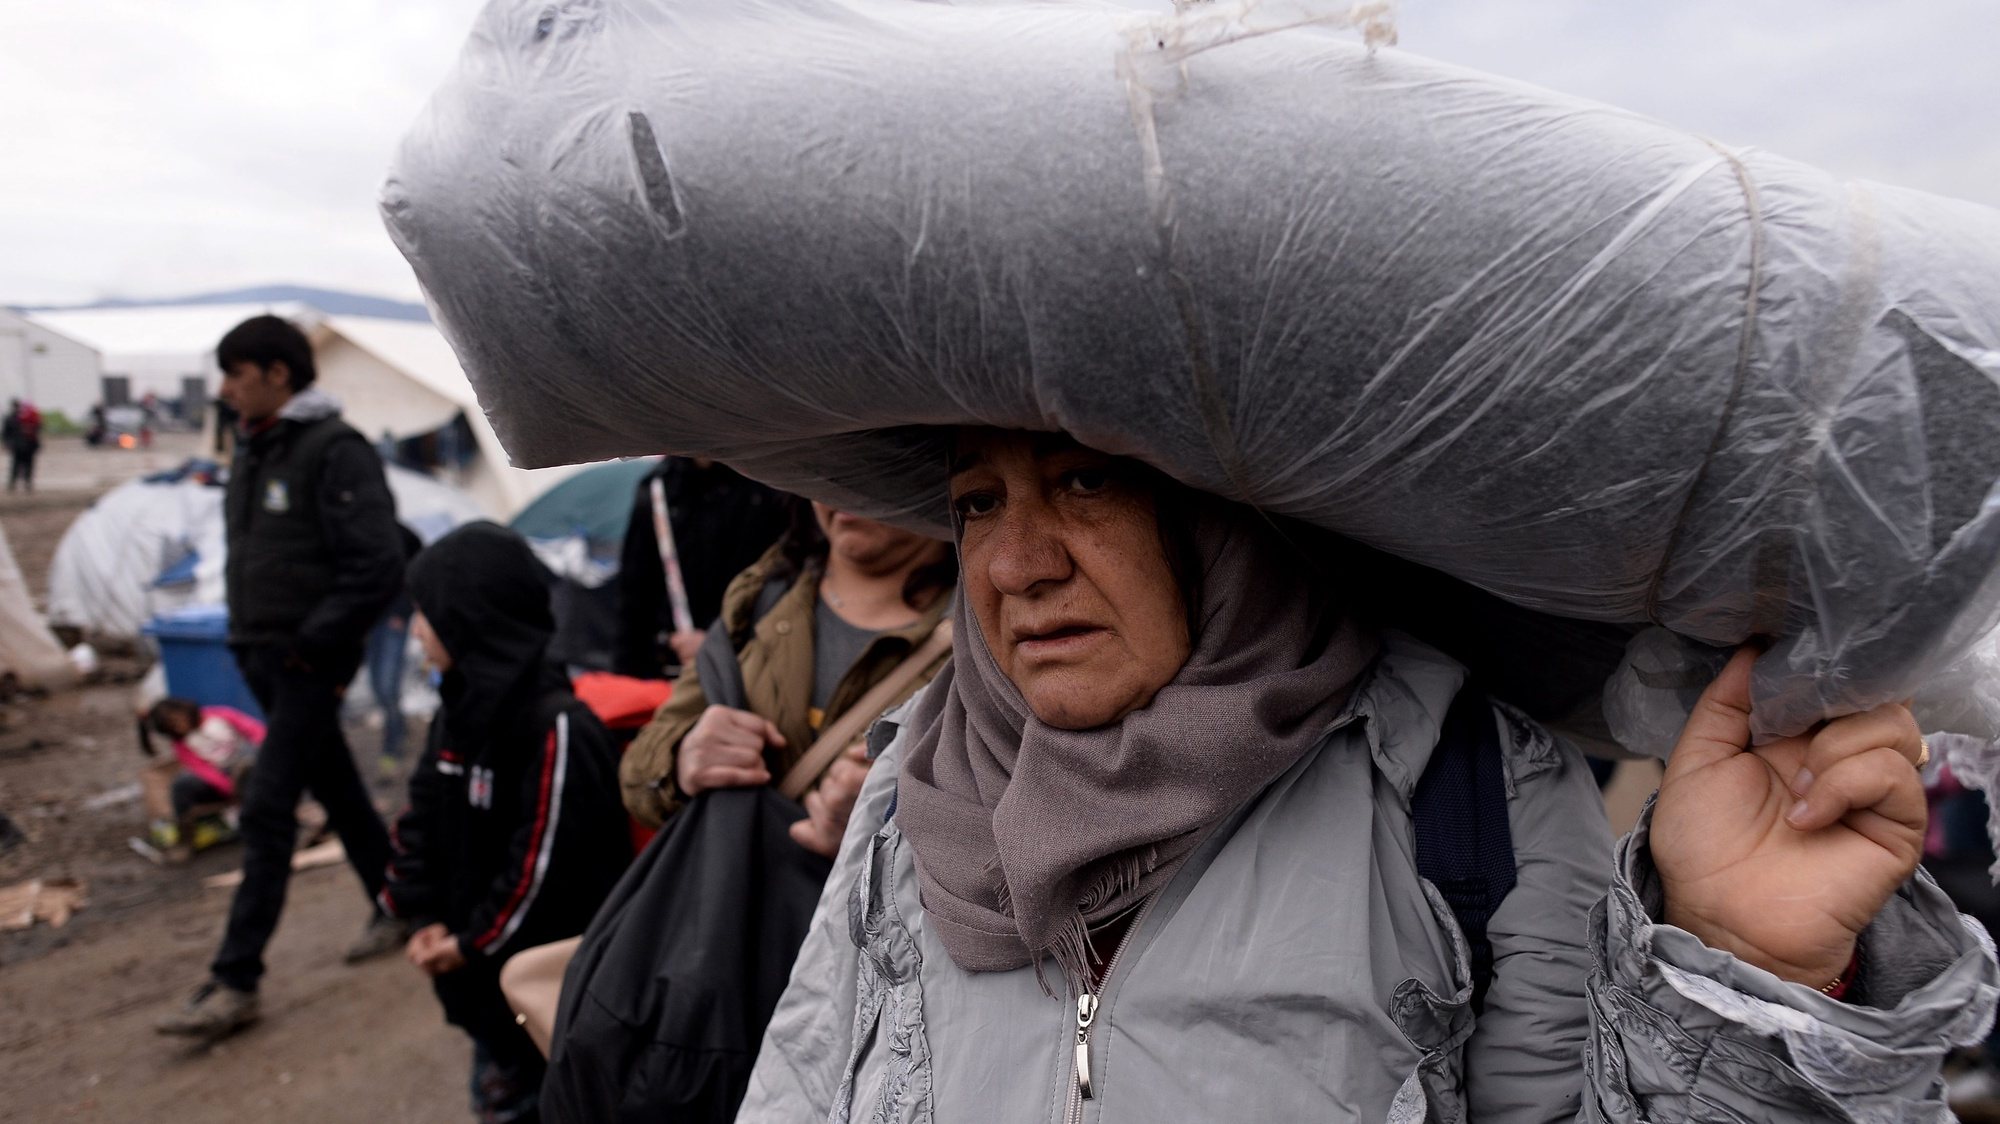 epa05214864 A migrant carries a blanket, at a refugee camp at the border between Greece and the Former Yugoslav Republic of Macedonia (FYROM) near Idomeni, Northern Greece, 15 March 2016. Greek Prime Minister Alxis Tsipras on 15 March called on refugees to allow the Athens government to move them from the Idomeni camp to other reception centers, stressing that the borders are closed and will not be reopened in the near future. Greece has registered more than 44,000 migrants that are currently trapped due to entry restrictions already imposed by Macedonia in recent months, by denying entry to all those who are considered economic migrants, prohibiting the passage of Afghans, and finally denying entry to all Syrians and Iraqis who are not from combat areas.  EPA/NAKE BATEV  EPA/NAKE BATEV